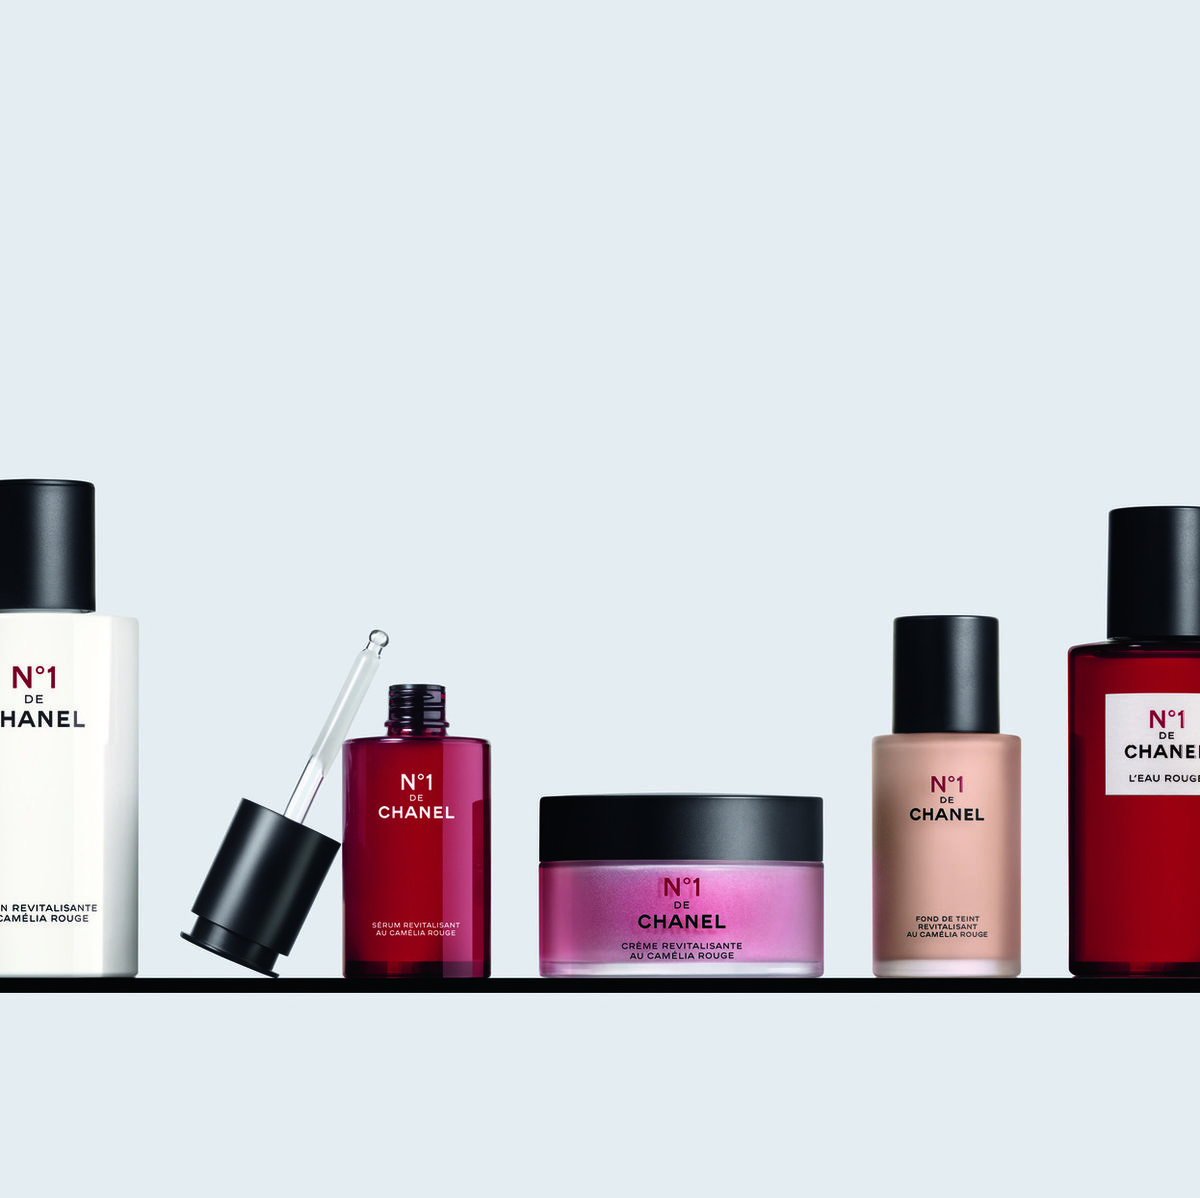 N°1 de Chanel: Active skincare for a new generation